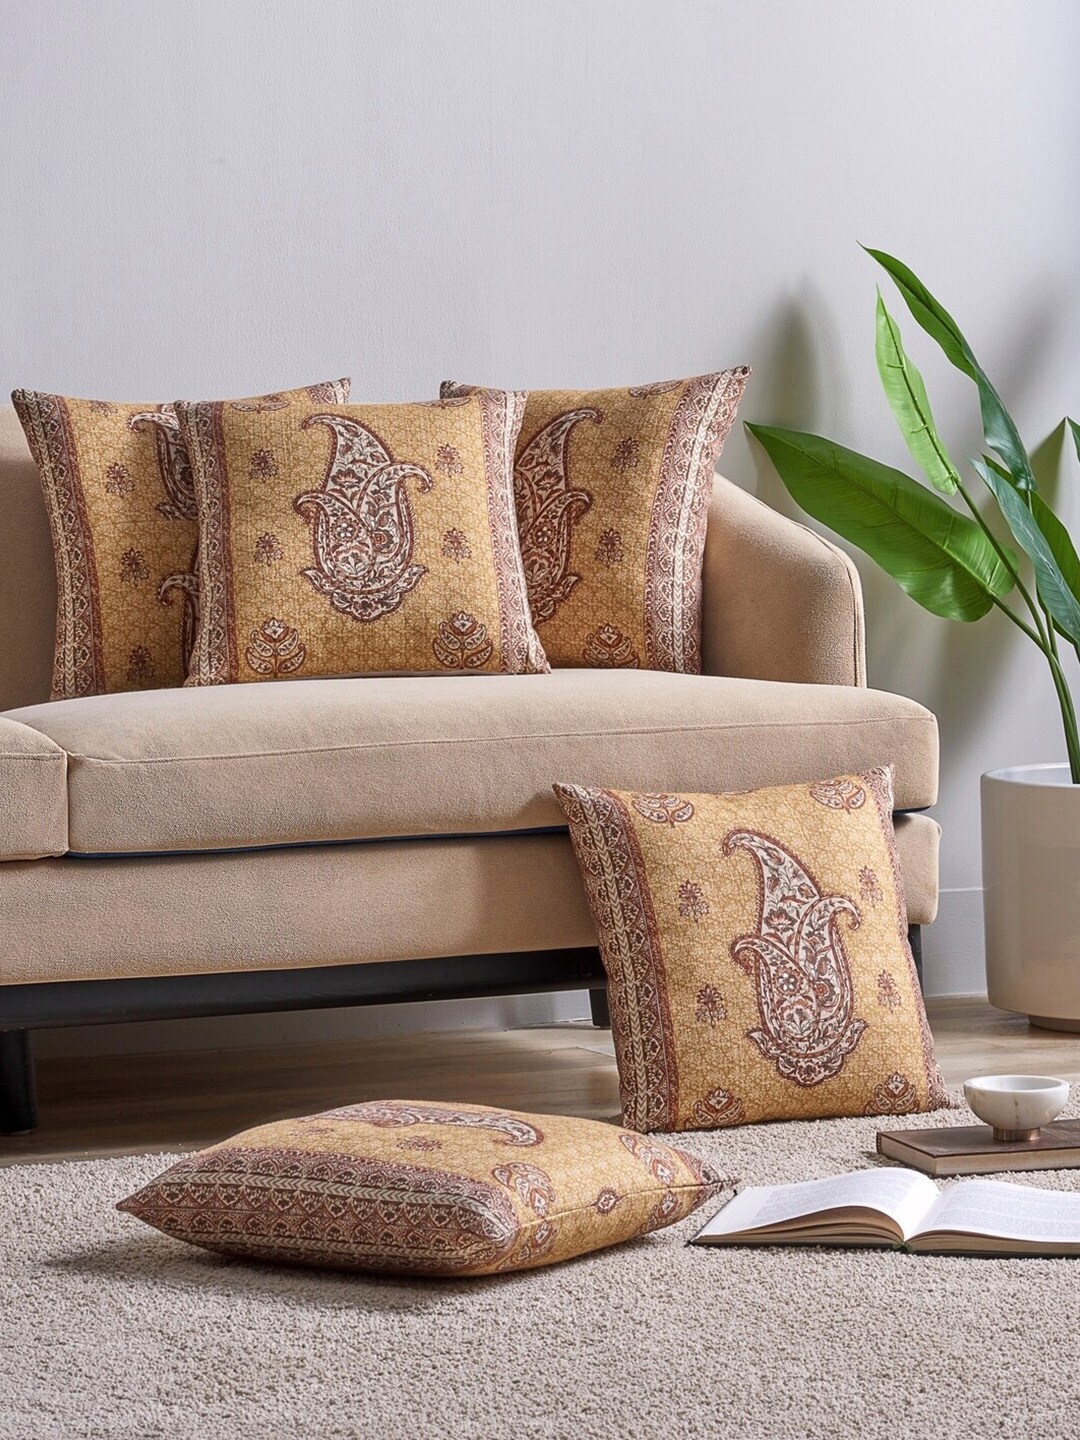 DDecor Gold-Toned & White Set of 5 Ethnic Motifs Square Cushion Covers Price in India